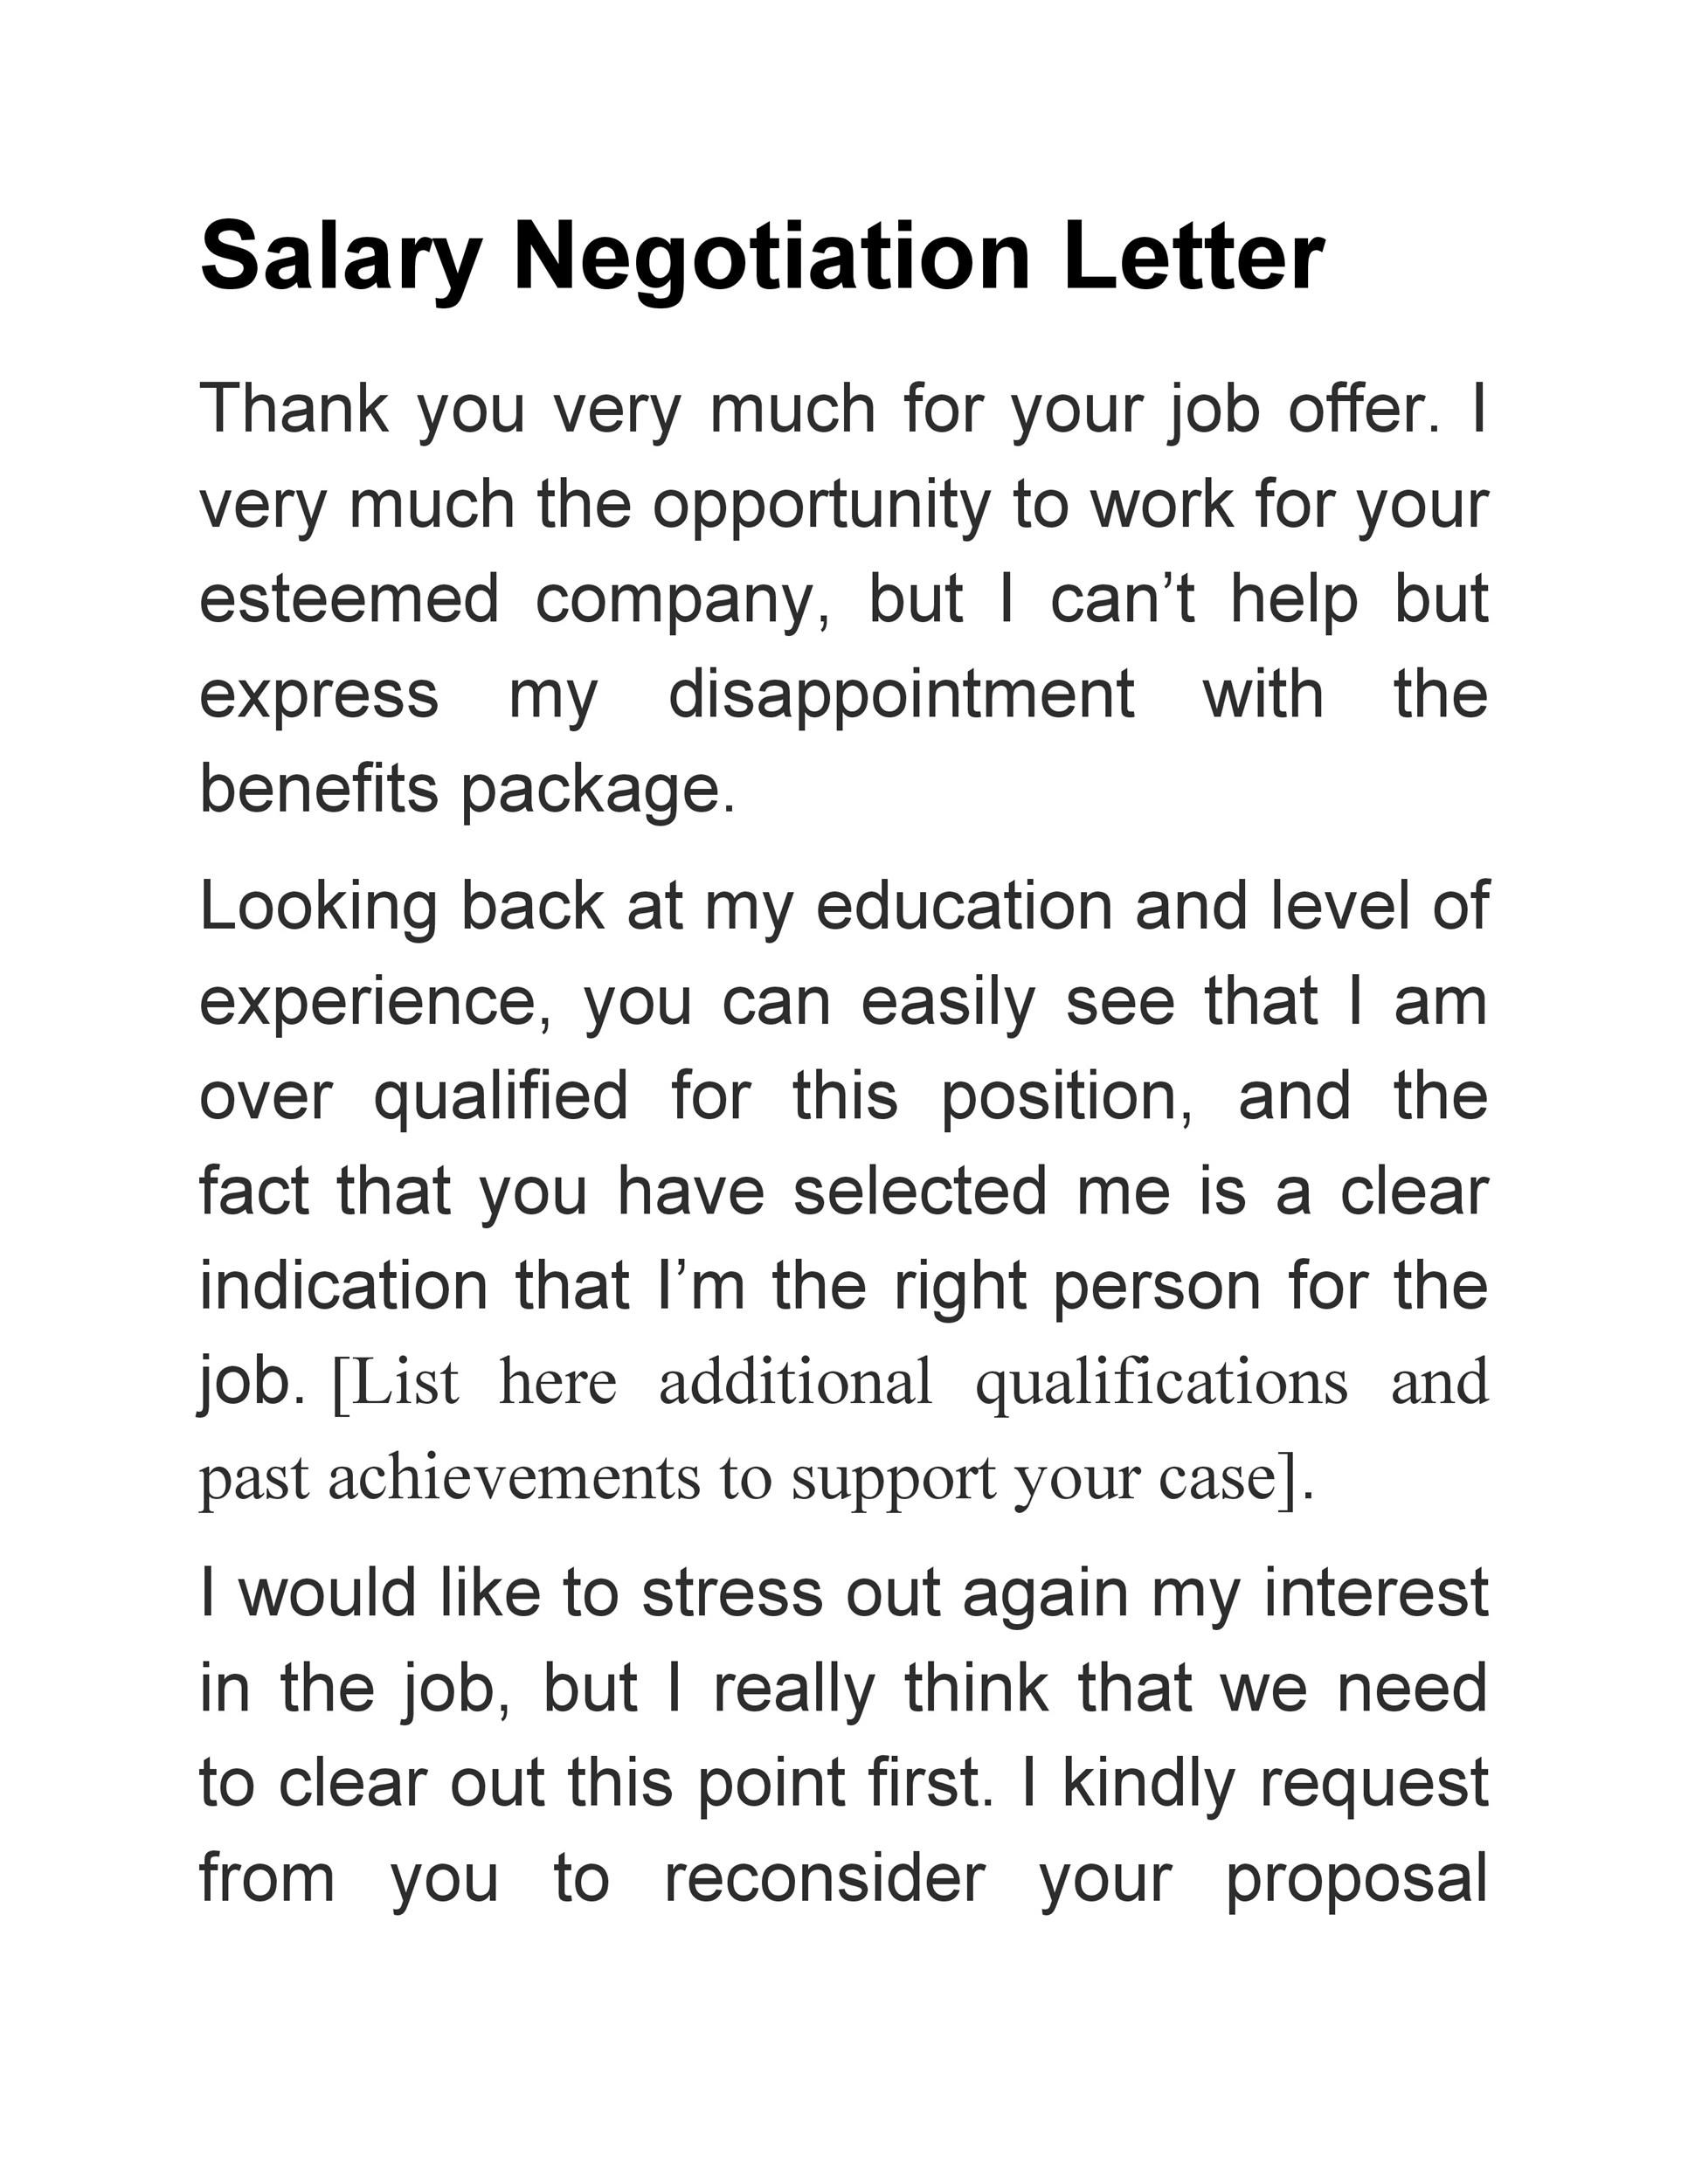 49 Best Salary Negotiation Letters, Emails & Tips ᐅ TemplateLab